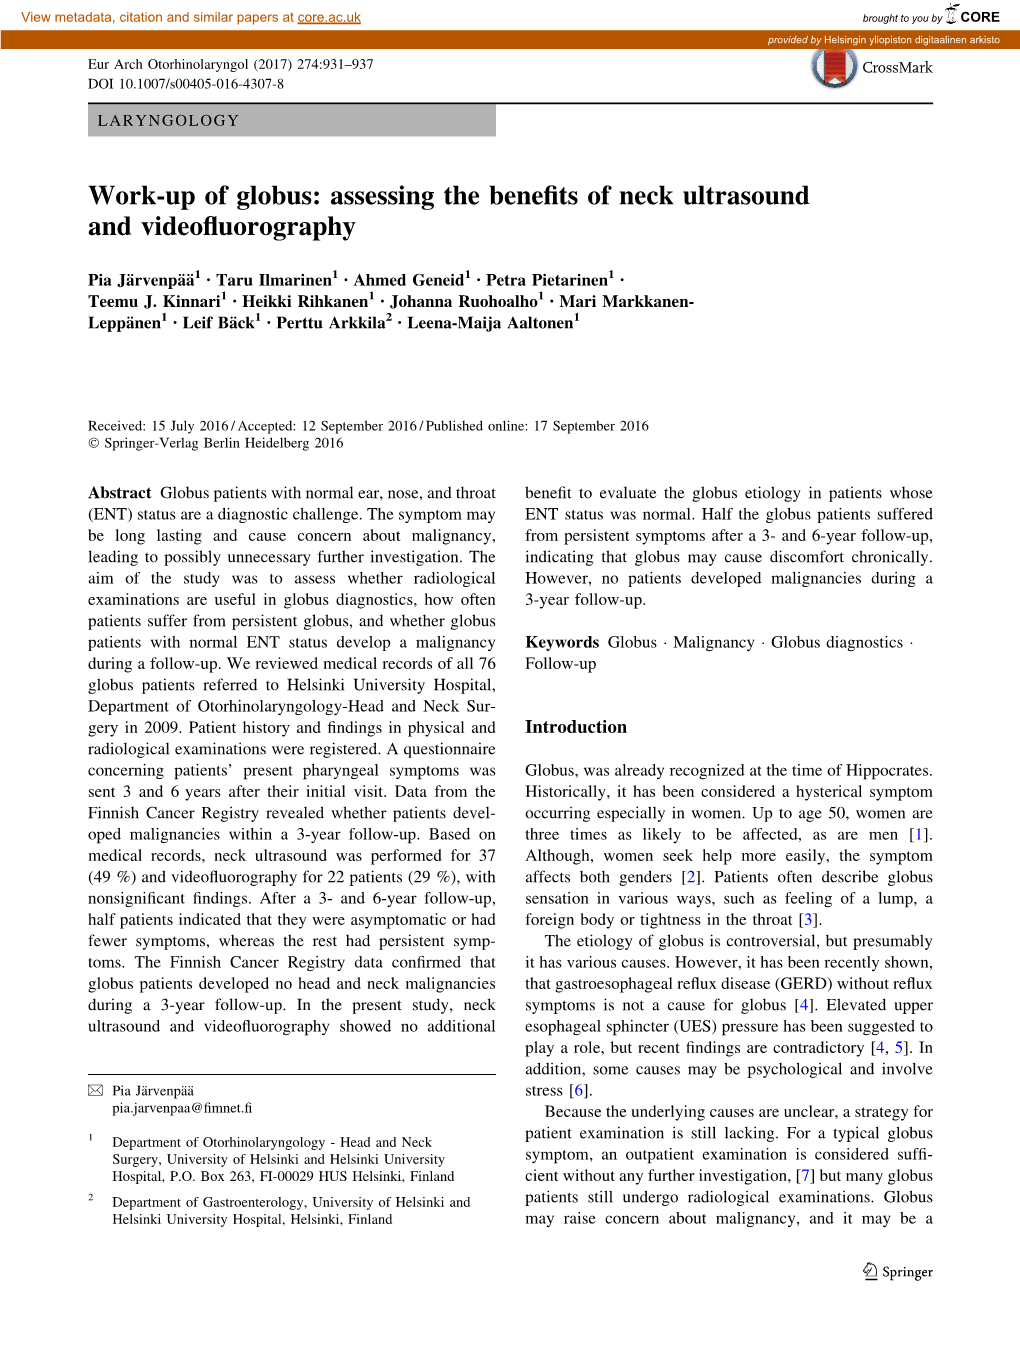 Work-Up of Globus: Assessing the Beneﬁts of Neck Ultrasound and Videoﬂuorography